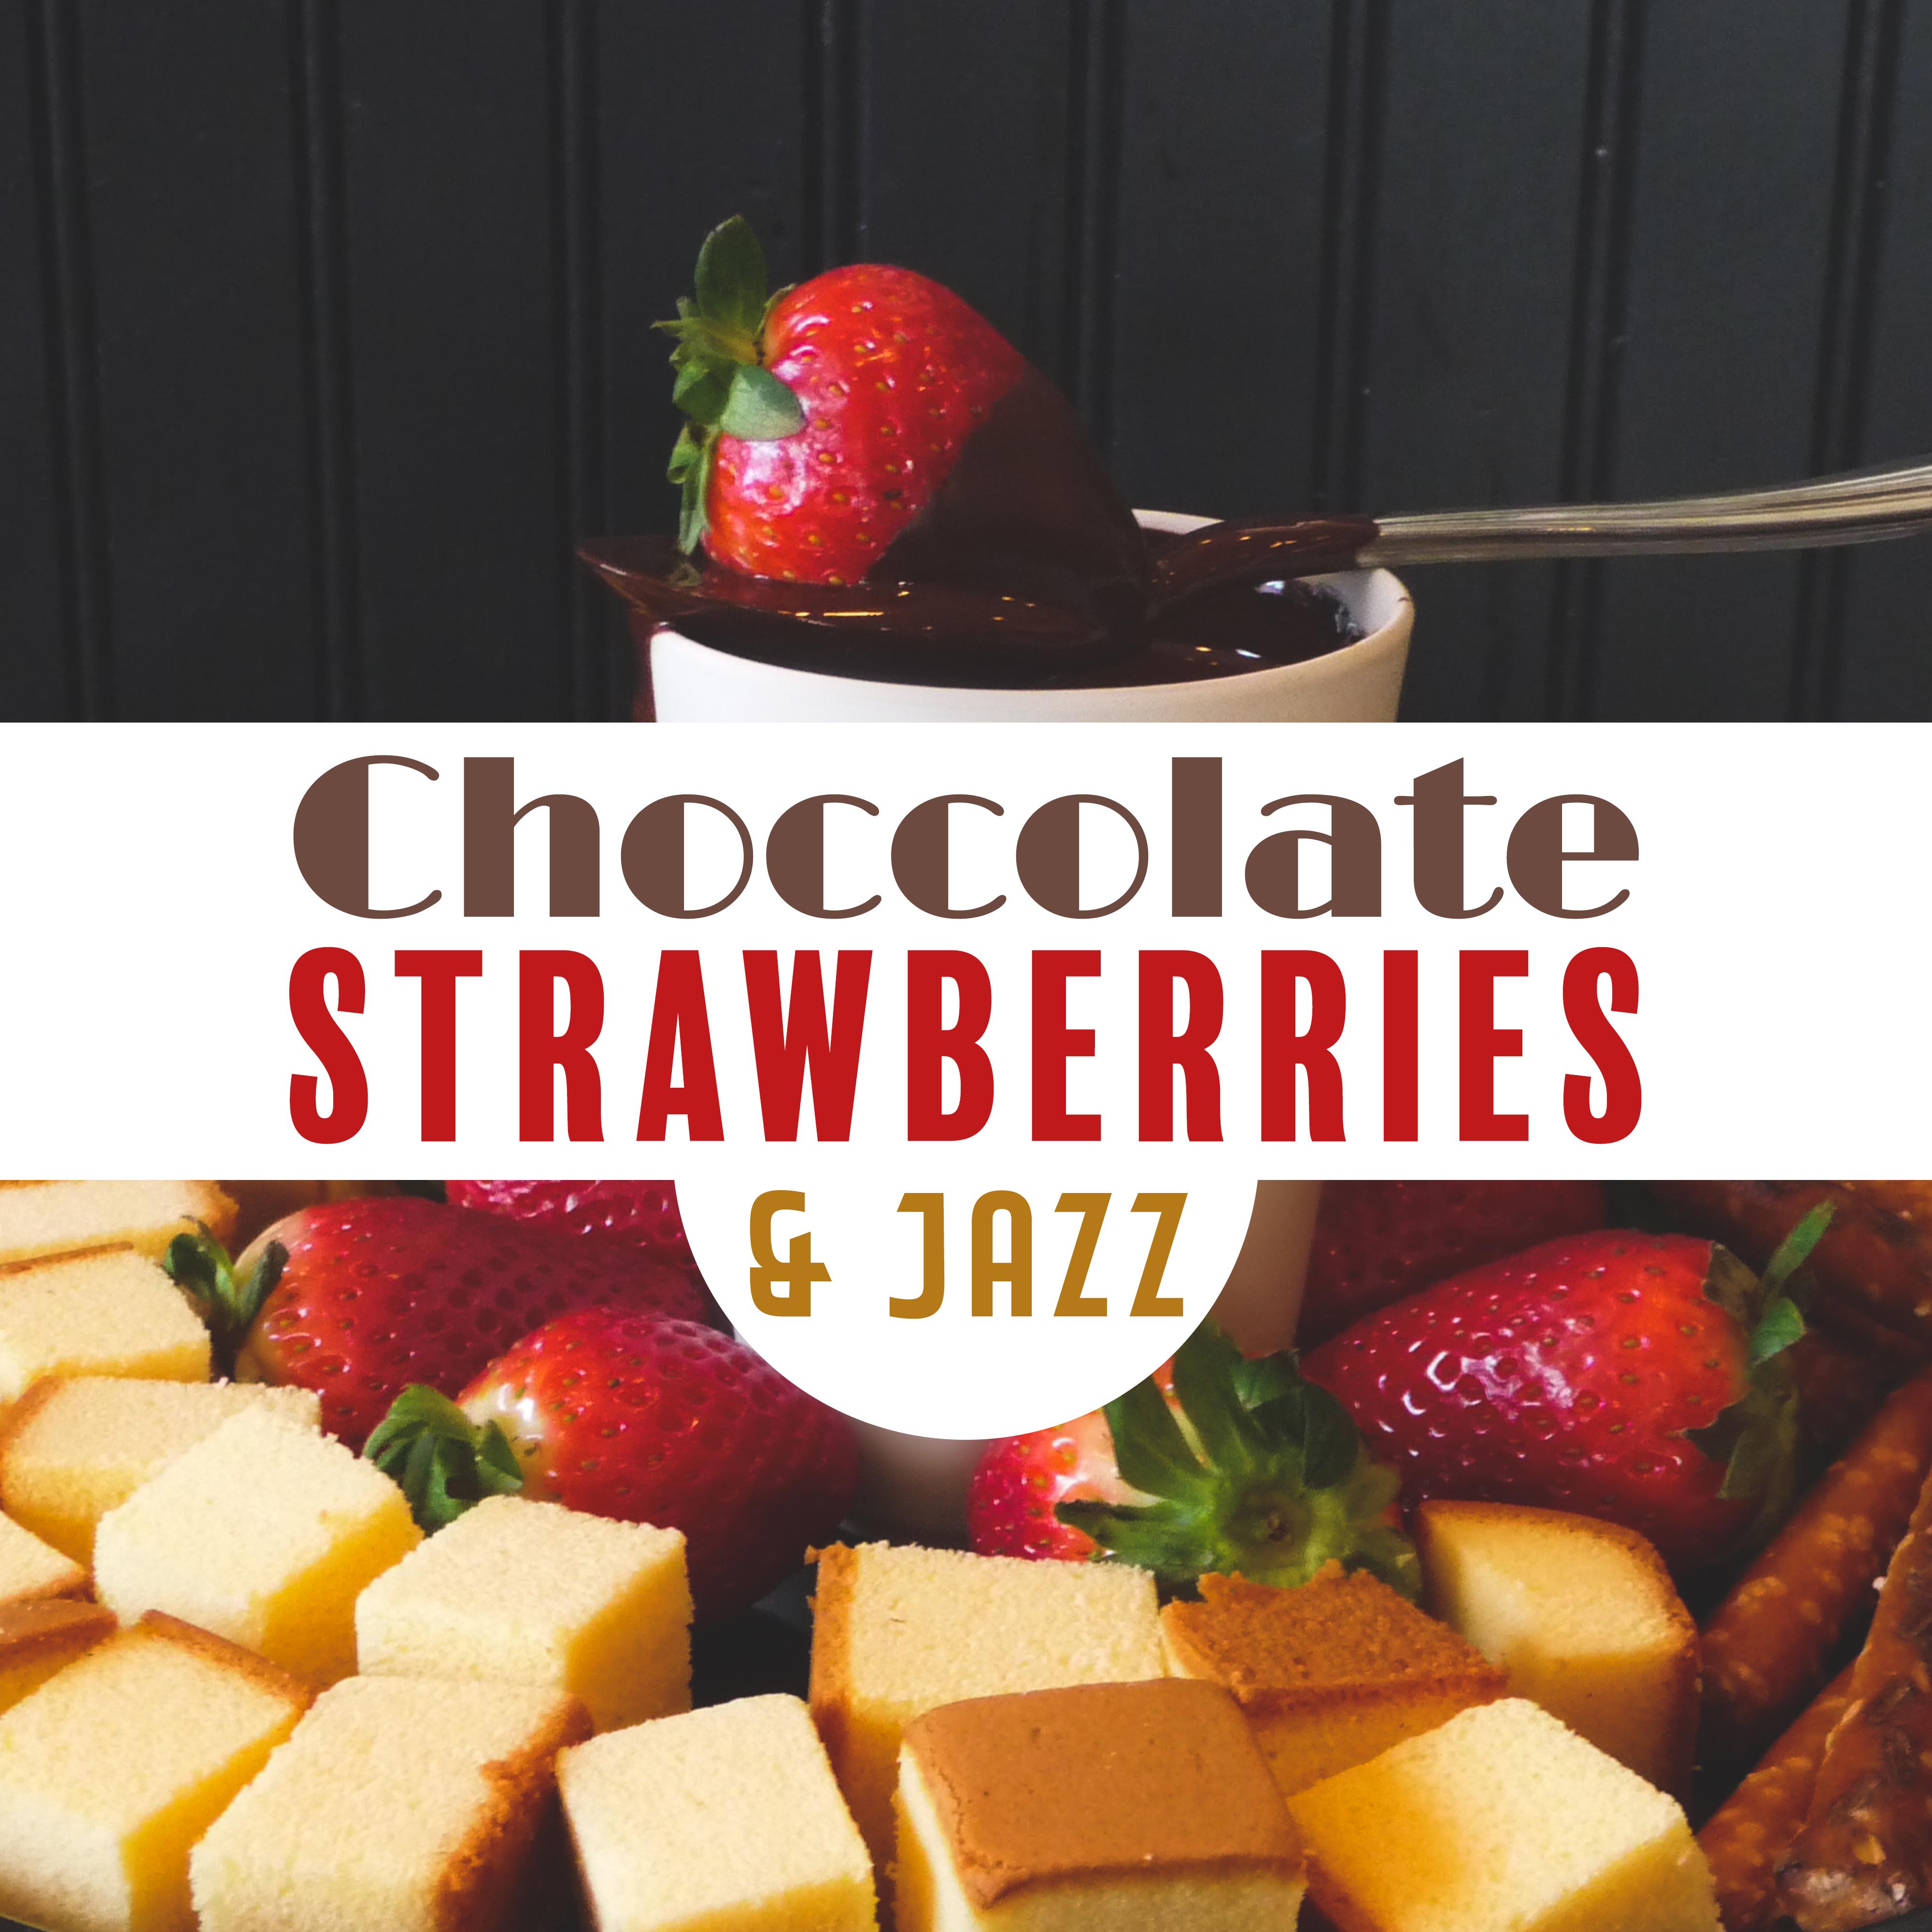 Choccolate, Strawberries & Jazz: 2019 Smooth Jazz Music Compilation for Cafe, Vintage Songs for Nice Time Spending with Coffee & Friends, Only Positive Emotions, Sounds of Best Relaxation